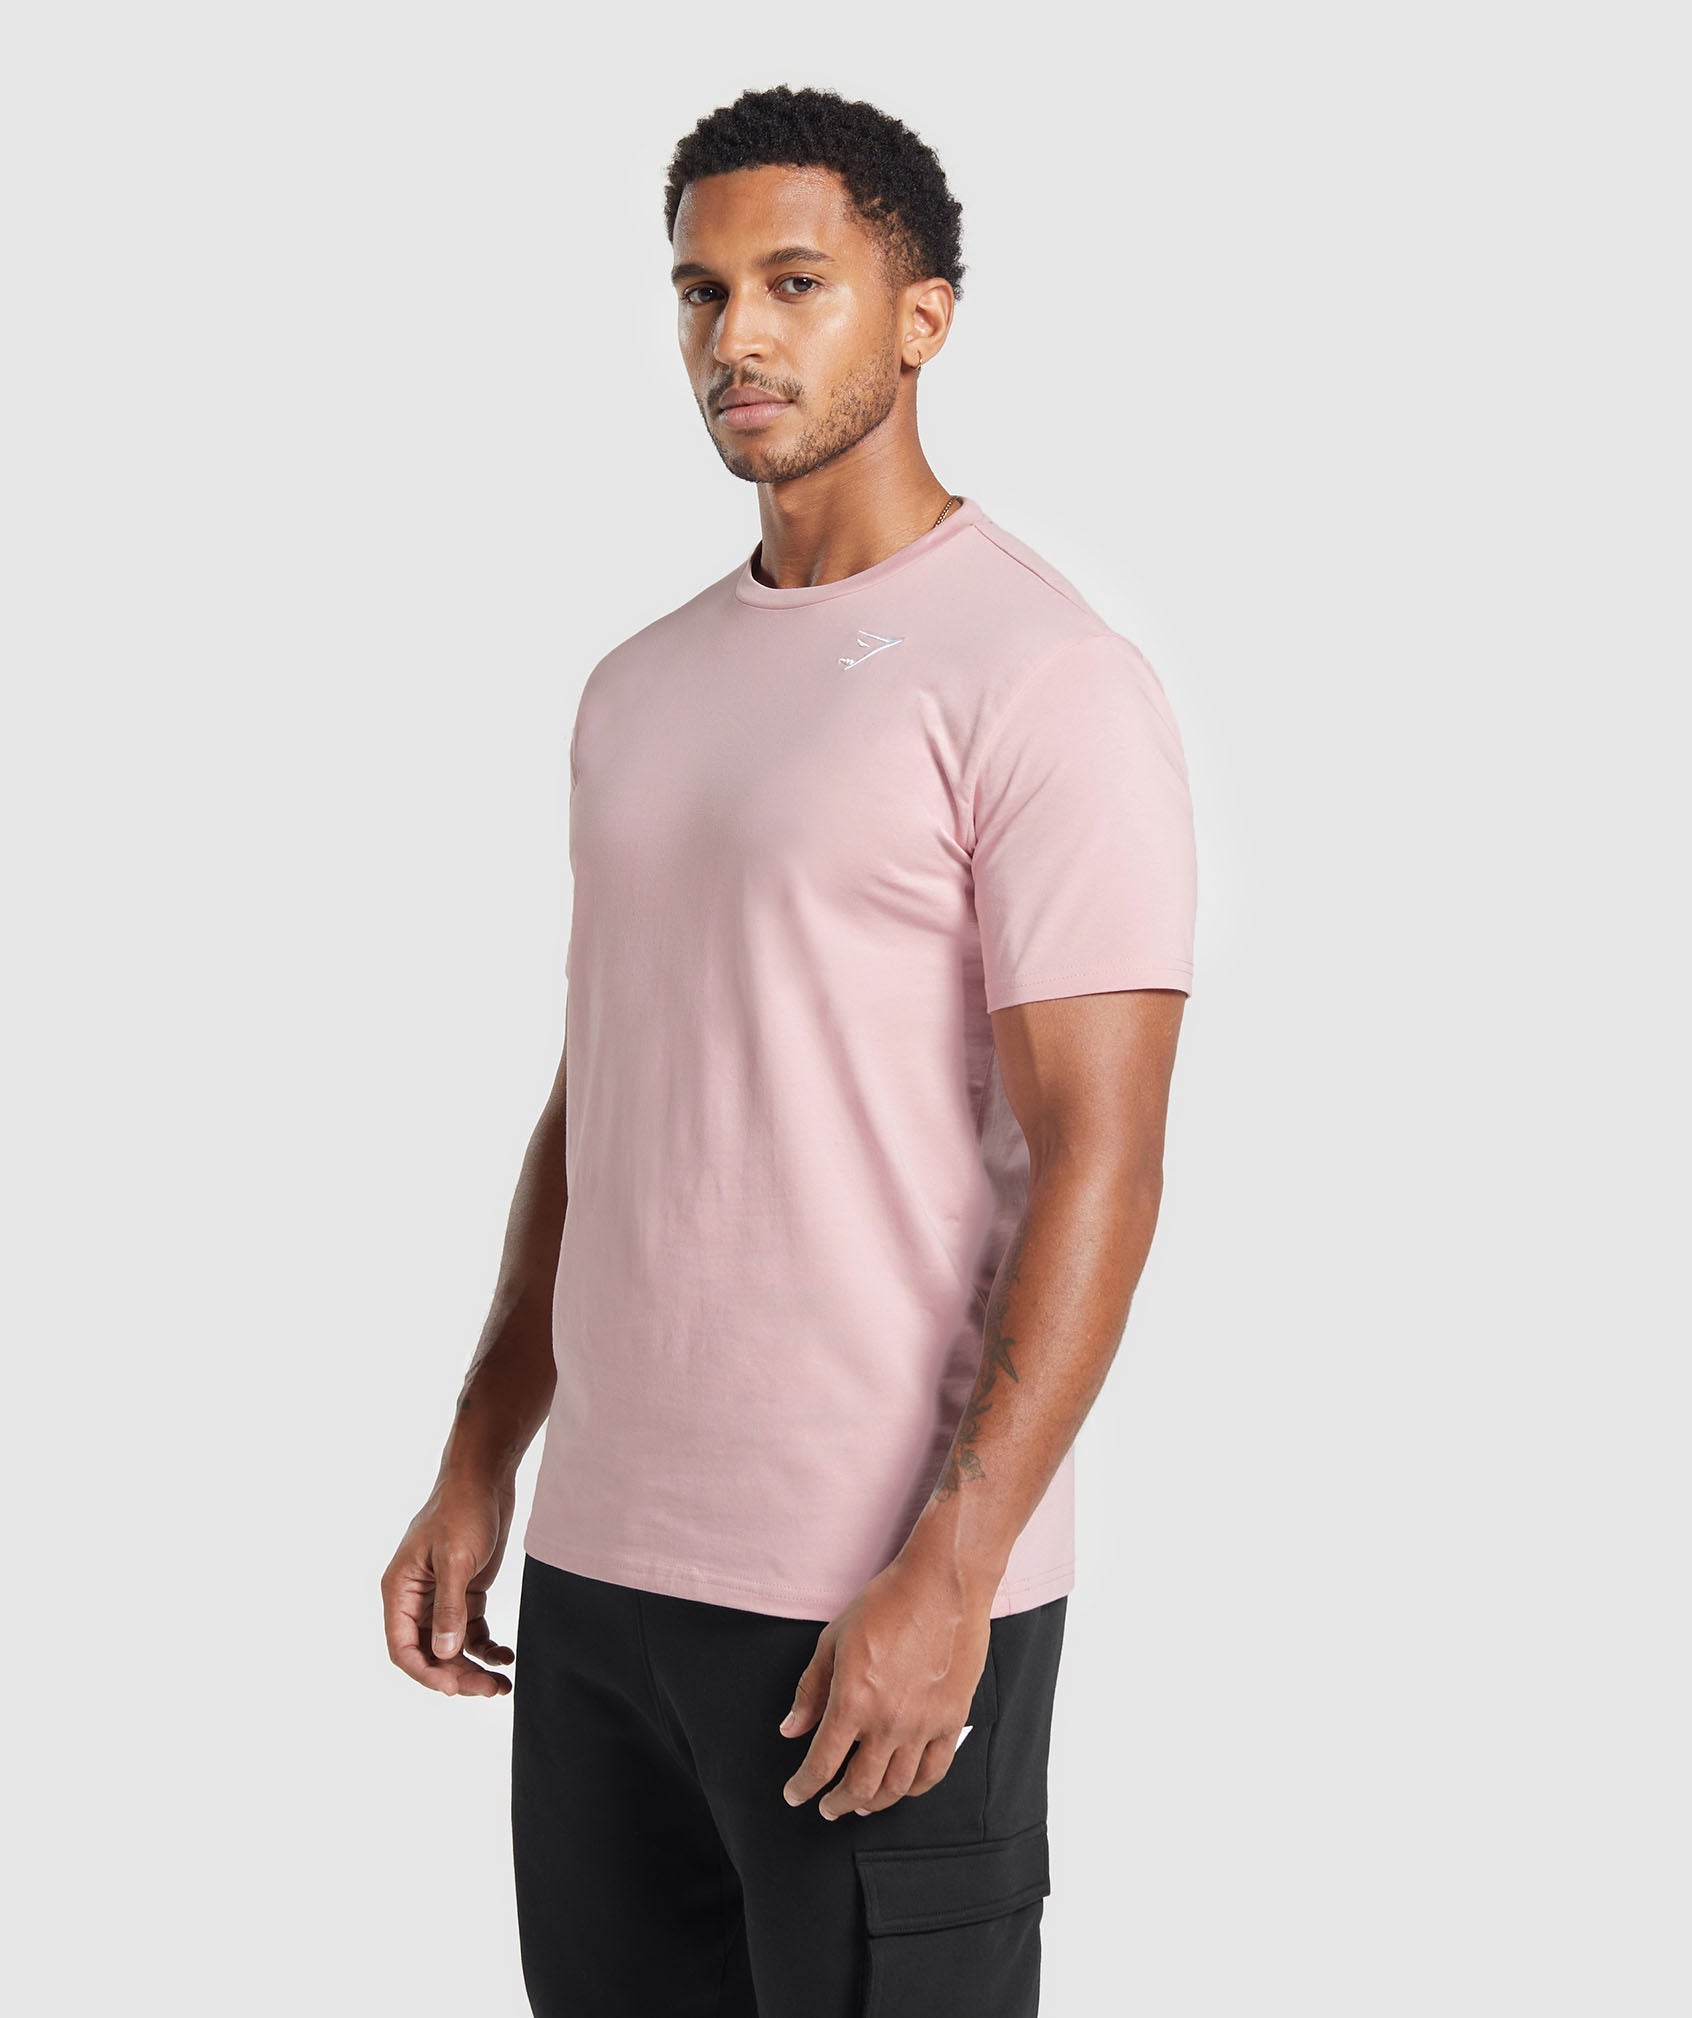 Crest T-Shirt in Light Pink - view 3